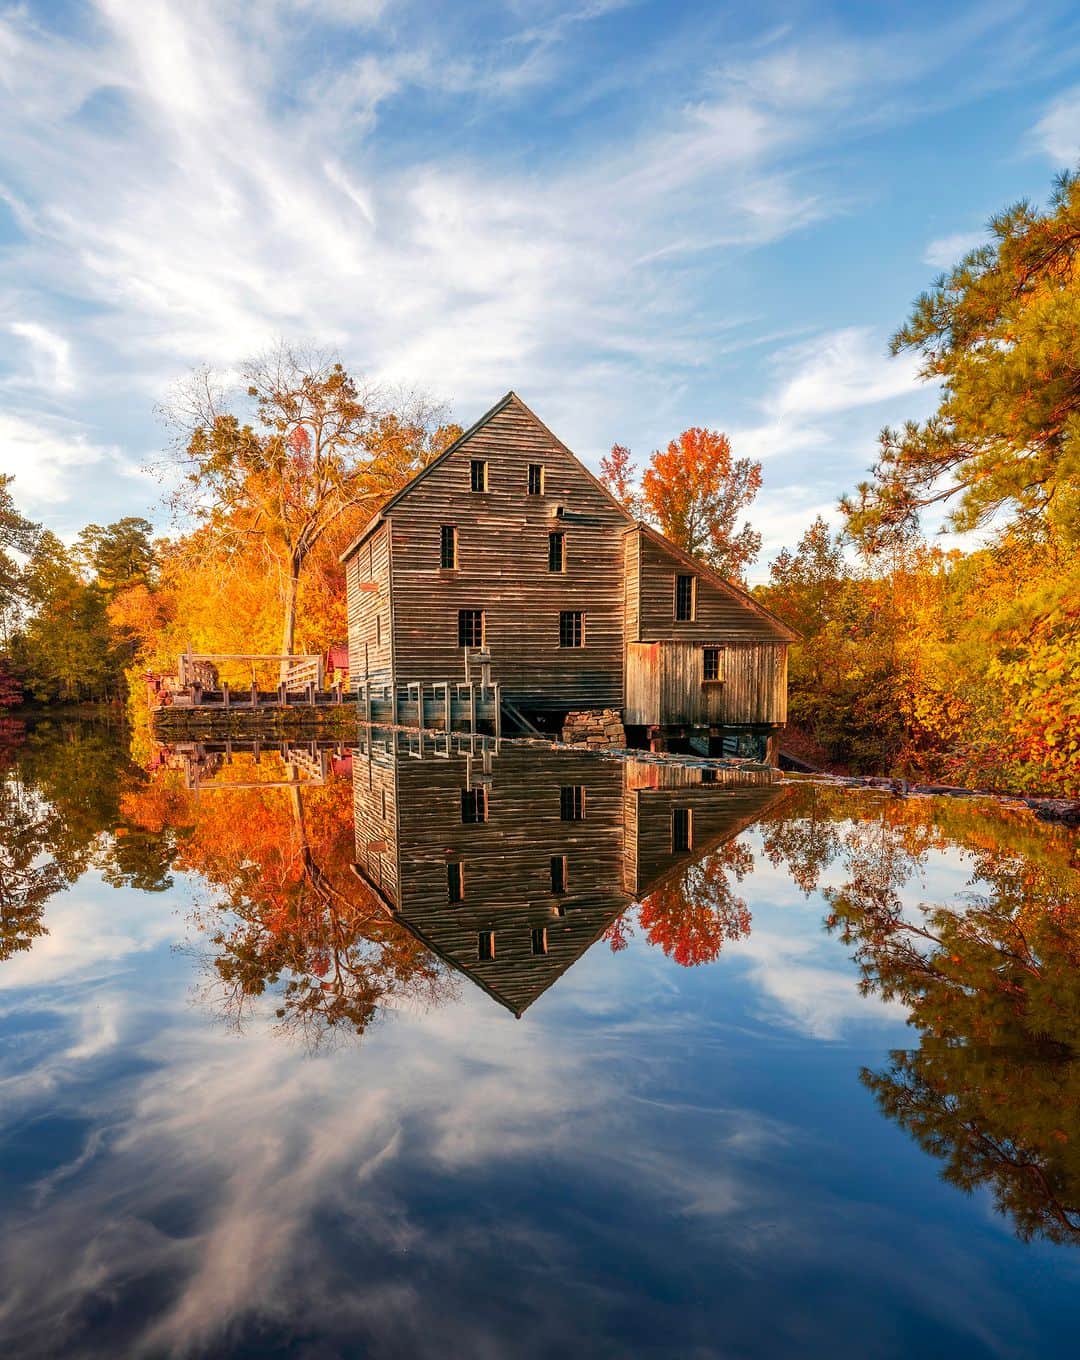 Sigma Corp Of America（シグマ）のインスタグラム：「A perfect fall reflection captured by @v_outdoors with the SIGMA 14-24mm F2.8 DG DN | Art 🫡  This lens, which features exclusive low dispersion glass elements and results in unprecedented high-resolution image quality, is part of our Black Friday Savings event and currently $100 off!   🍂 To shop out Black Friday Savings Event, visit bit.ly/sigma-black-friday-23-ig or click the link in our bio 🍂  #SIGMA #SIGMAphoto #photo #photography #blackfriday #fallphotography #fallphoto #zoomlens #wideanglelens #sigma1424mmart #sigmaart #sigmadgdn」